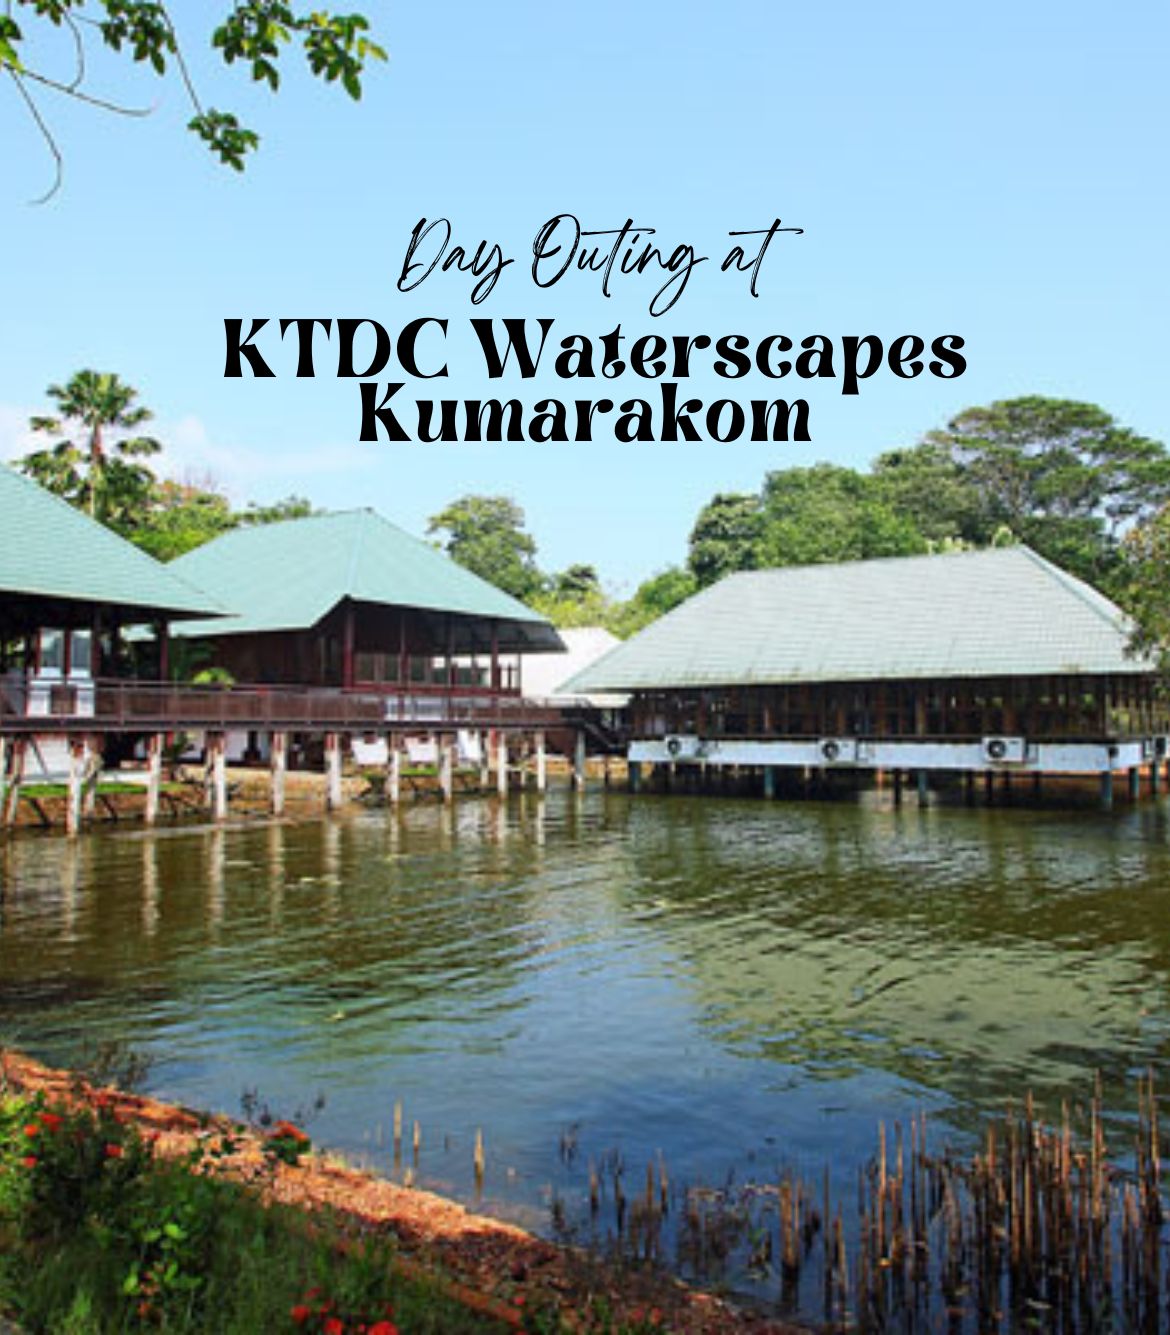 Day Outing at KTDC Waterscapes Kumarakom